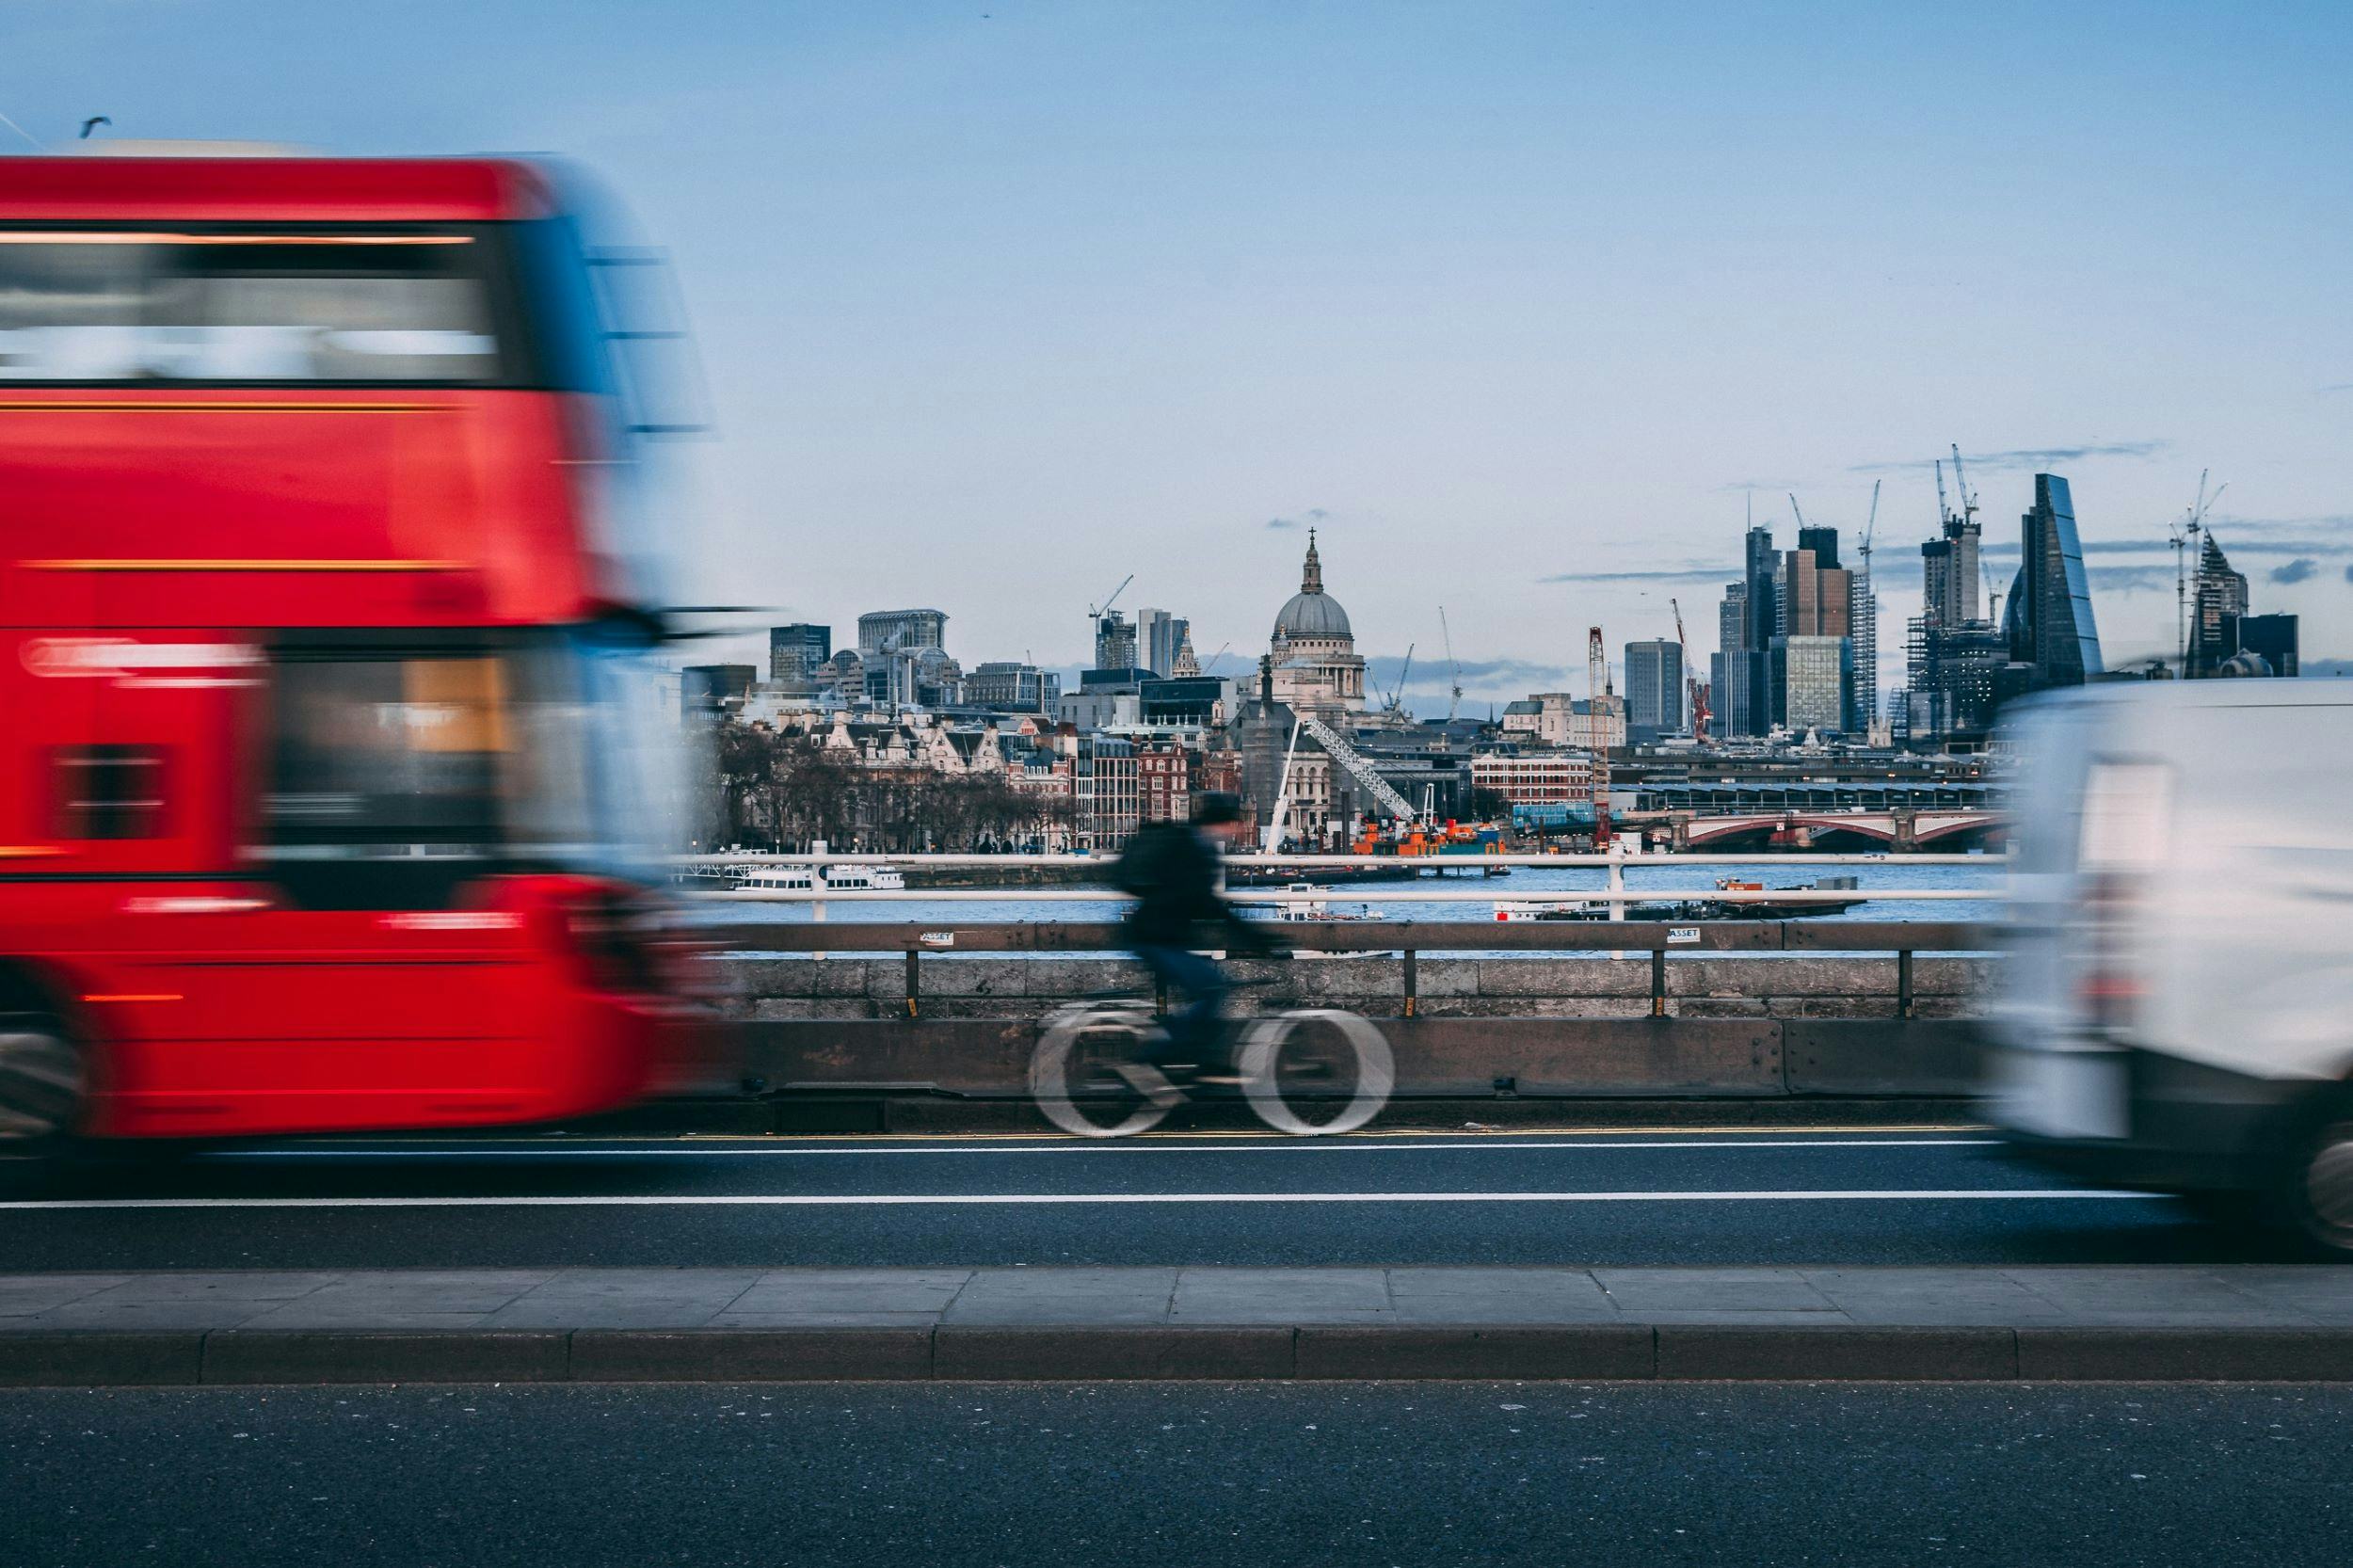 The UK will officially leave the European Union on January 1st 2021, but the full effect of Brexit on e-bike trade and regulations is still unclear. - Photo Shutterstock 